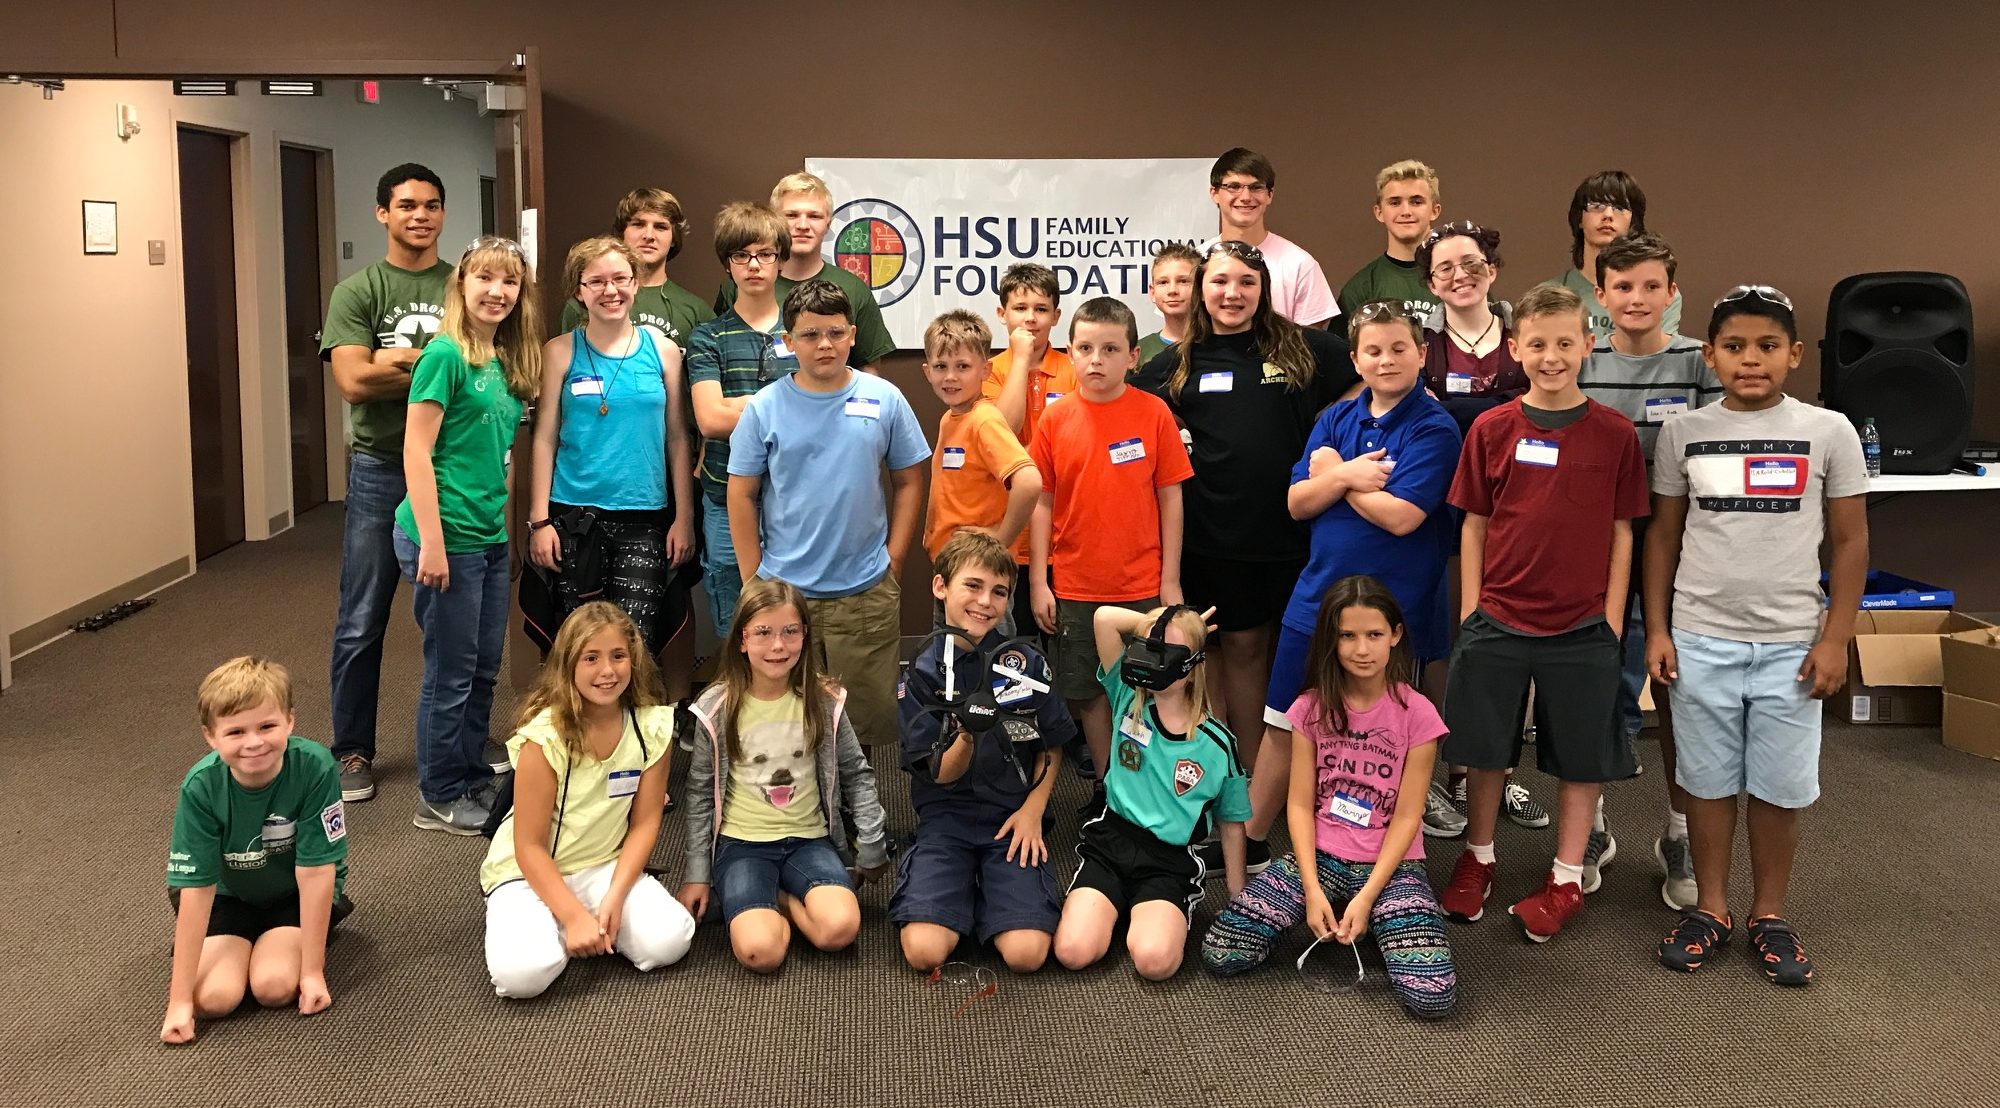 Game Changers Club for the Hsu Educational Foundation